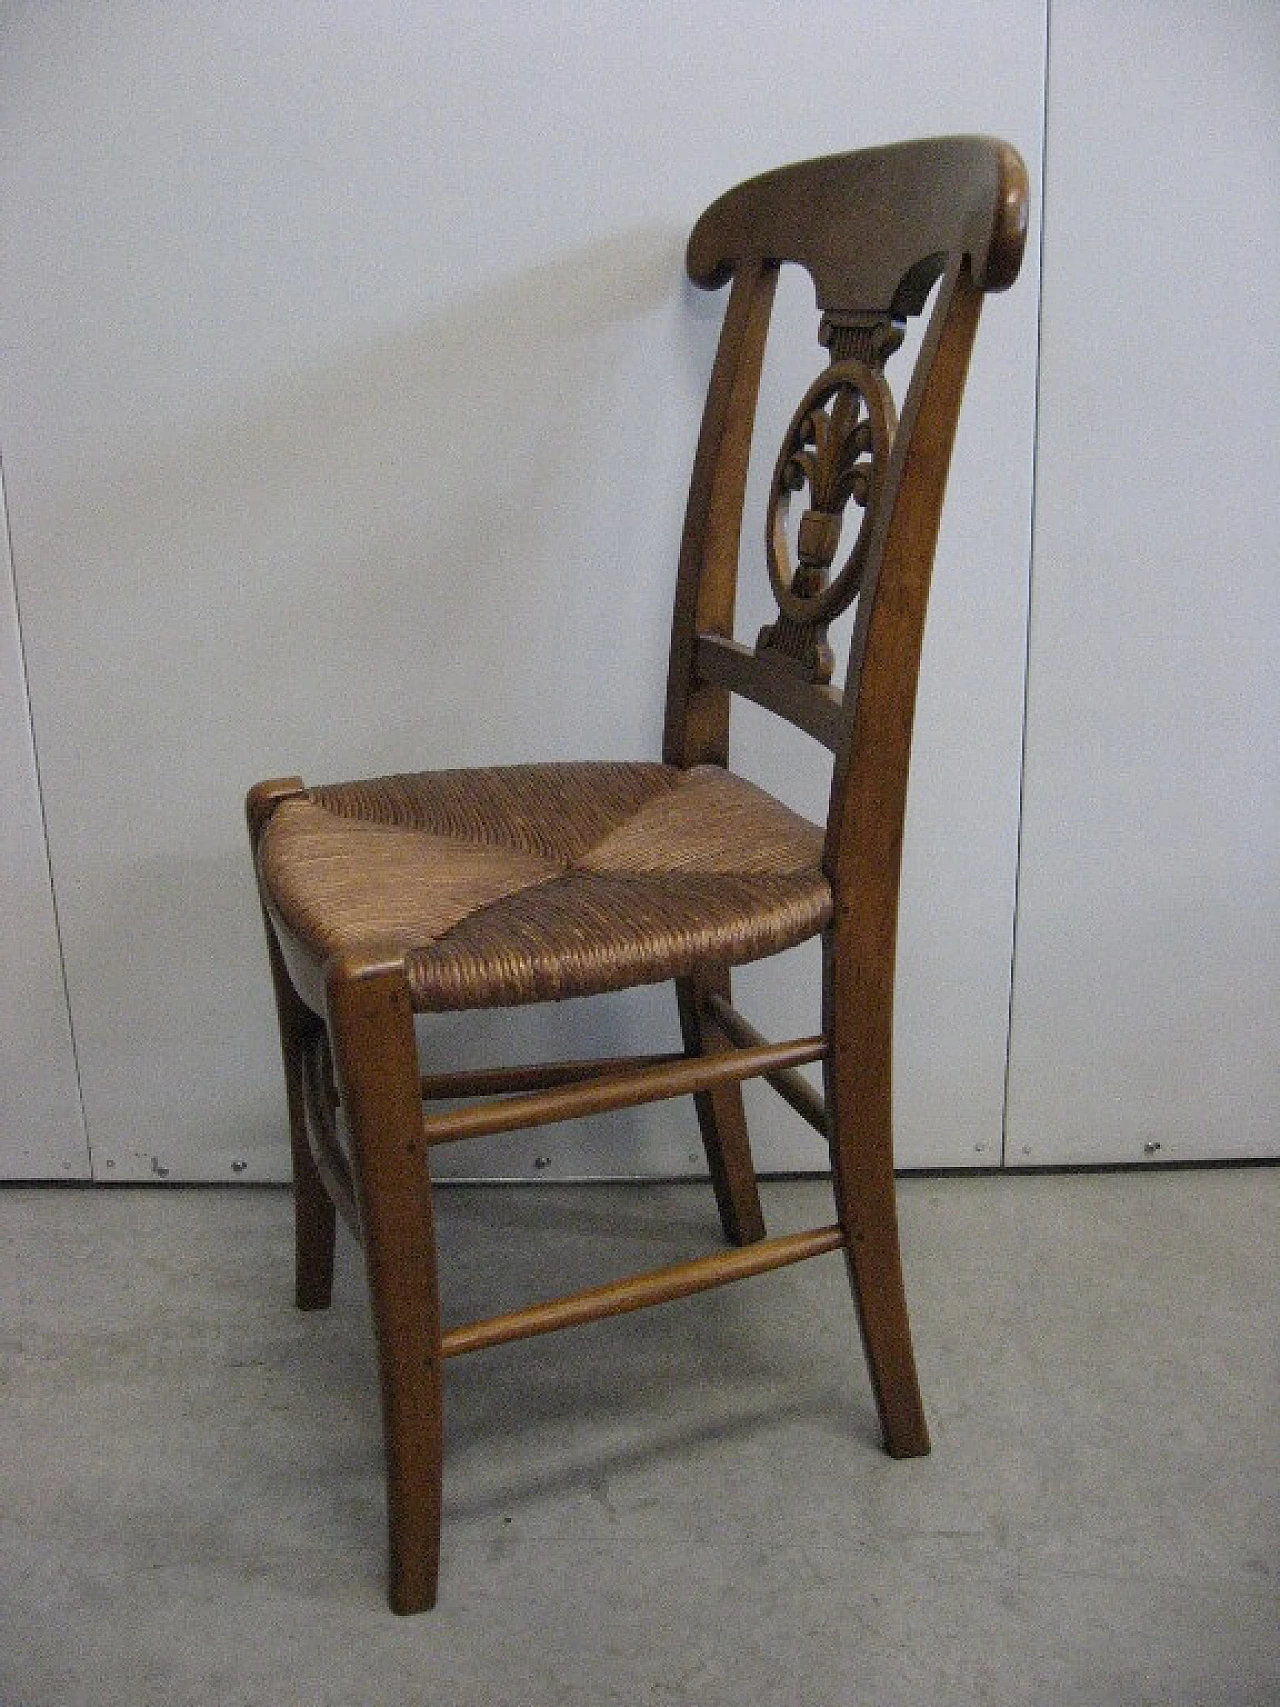 4 Walnut chairs with straw seat, early 2000s 1253813